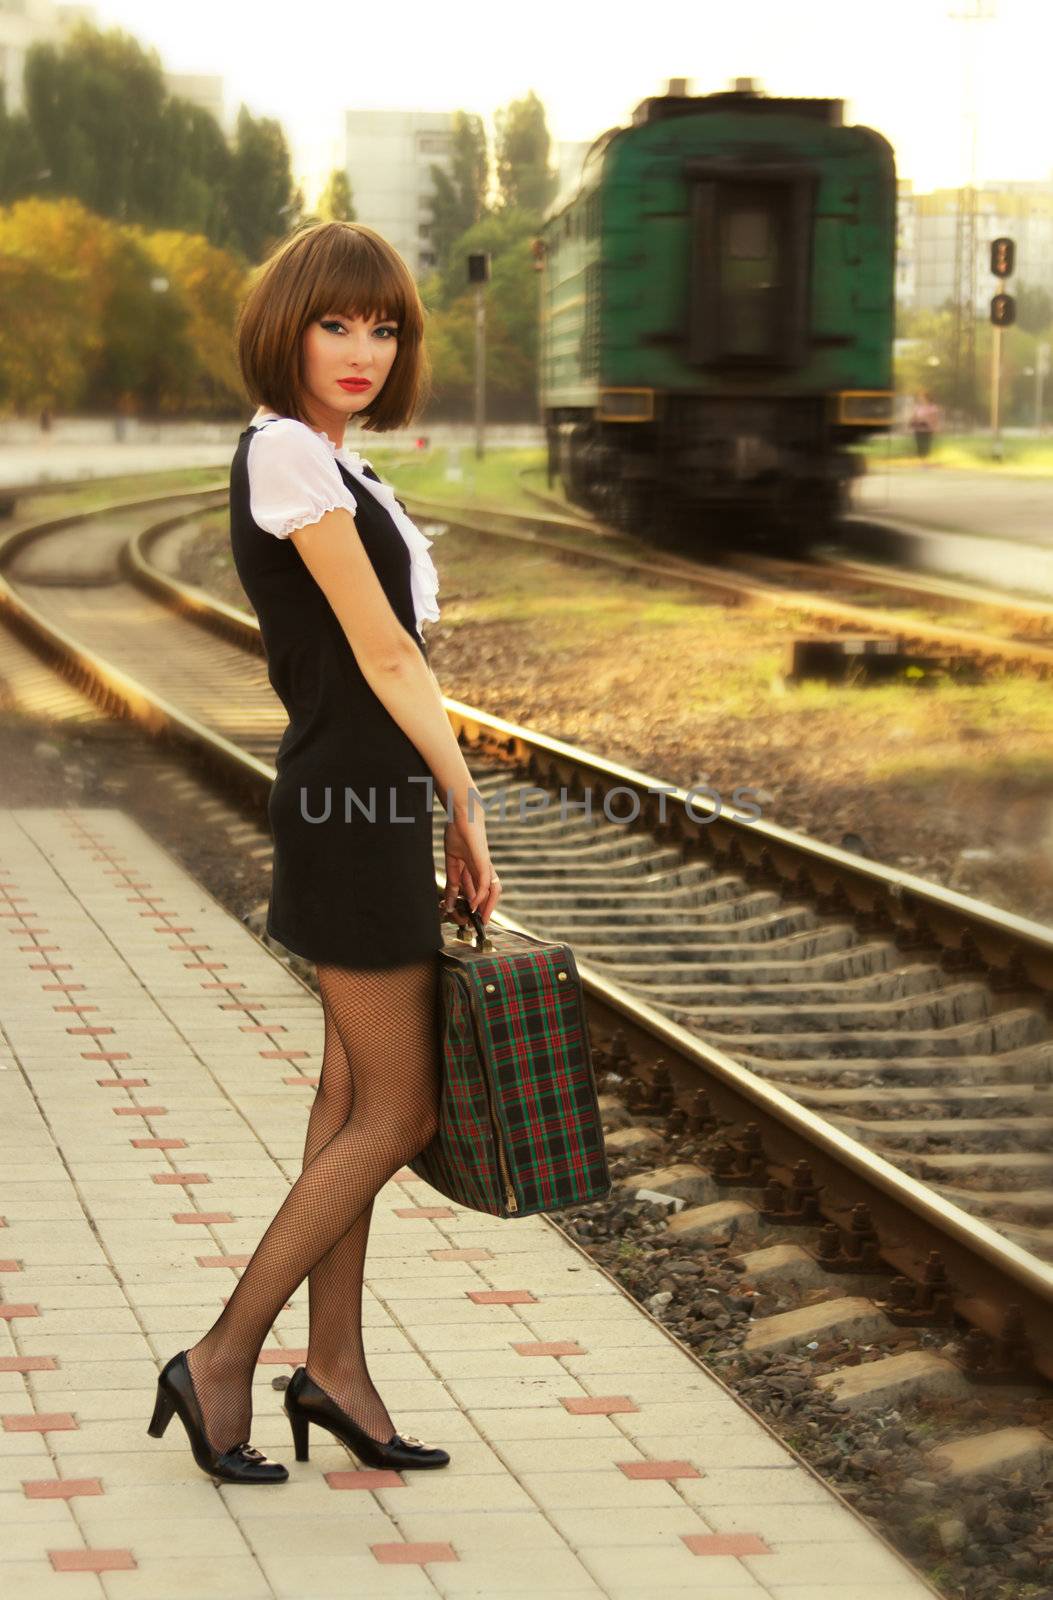 Retro-styled woman with suitcase on the platform waiting for train